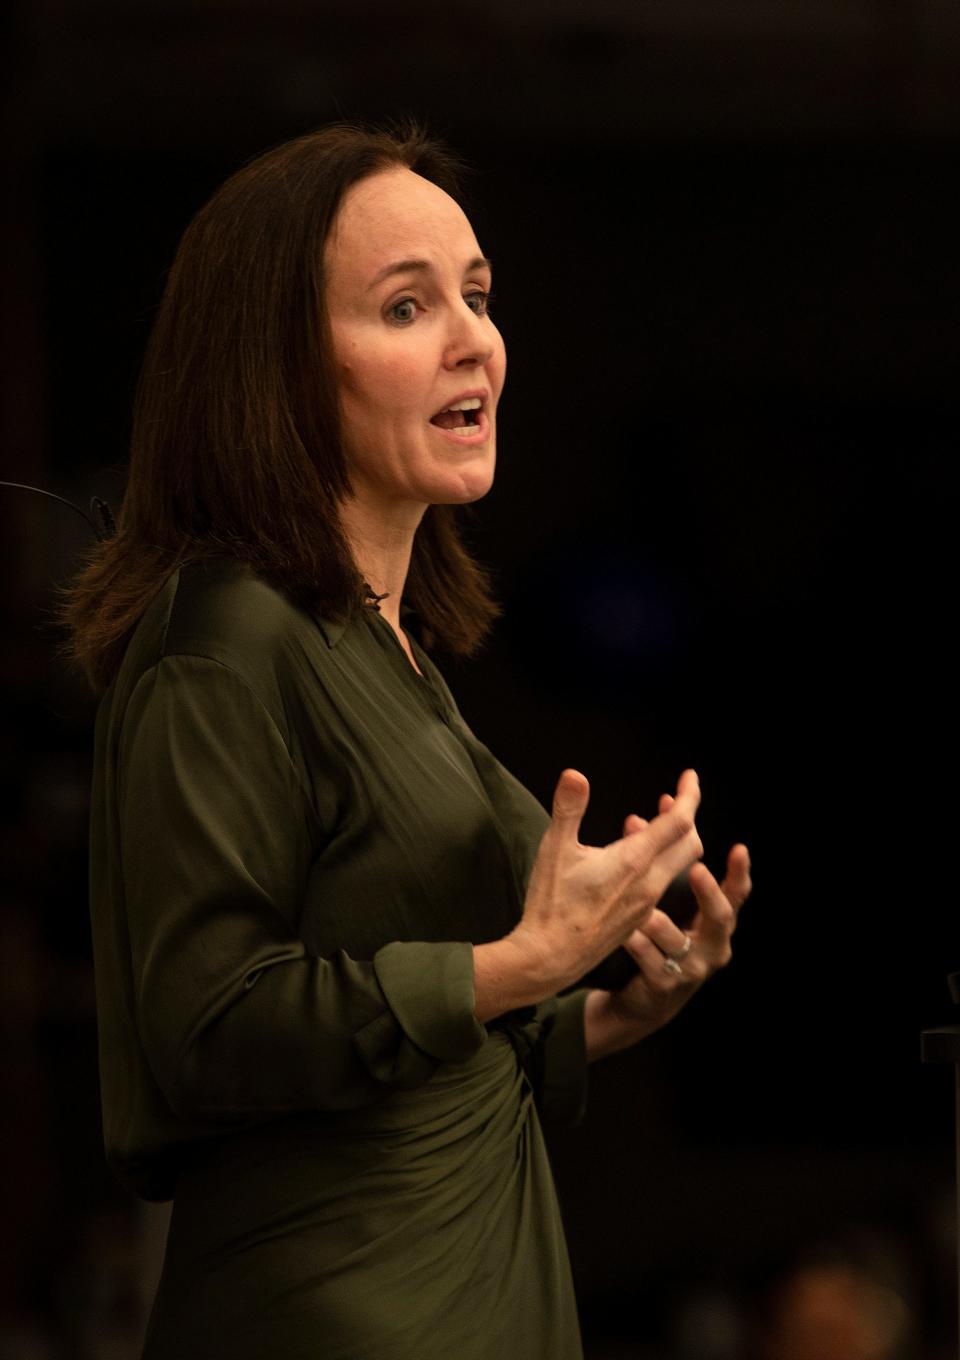 Pediatric surgeon Dr. Dana Suskind, author of the book "Parent Nation, Unlocking Every Child's Potential, Fulfilling Society's Promise," speaks about talking and interacting with young children helps maximize their brain development Sunday, June 12, 2022 during CivicCon at the Studer Community Institute in Pensacola.